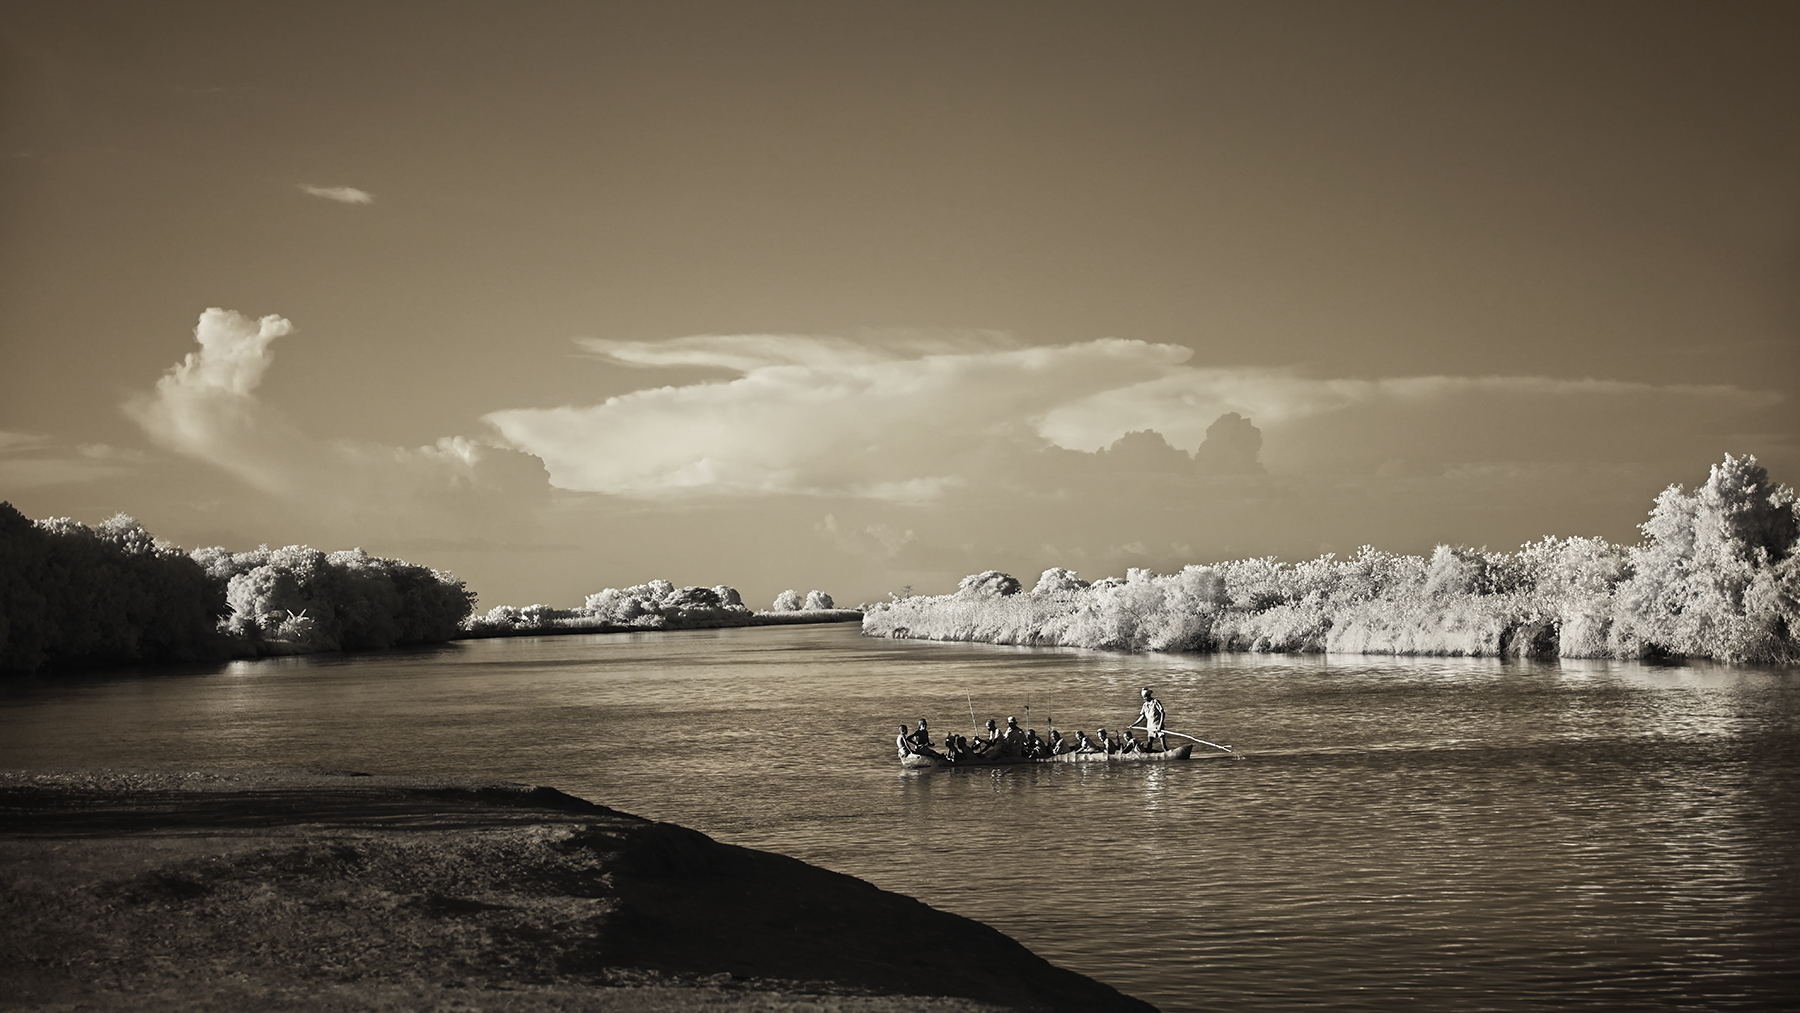 Fine art print of tribal people crossing the Omo River by canoe in Ethiopia